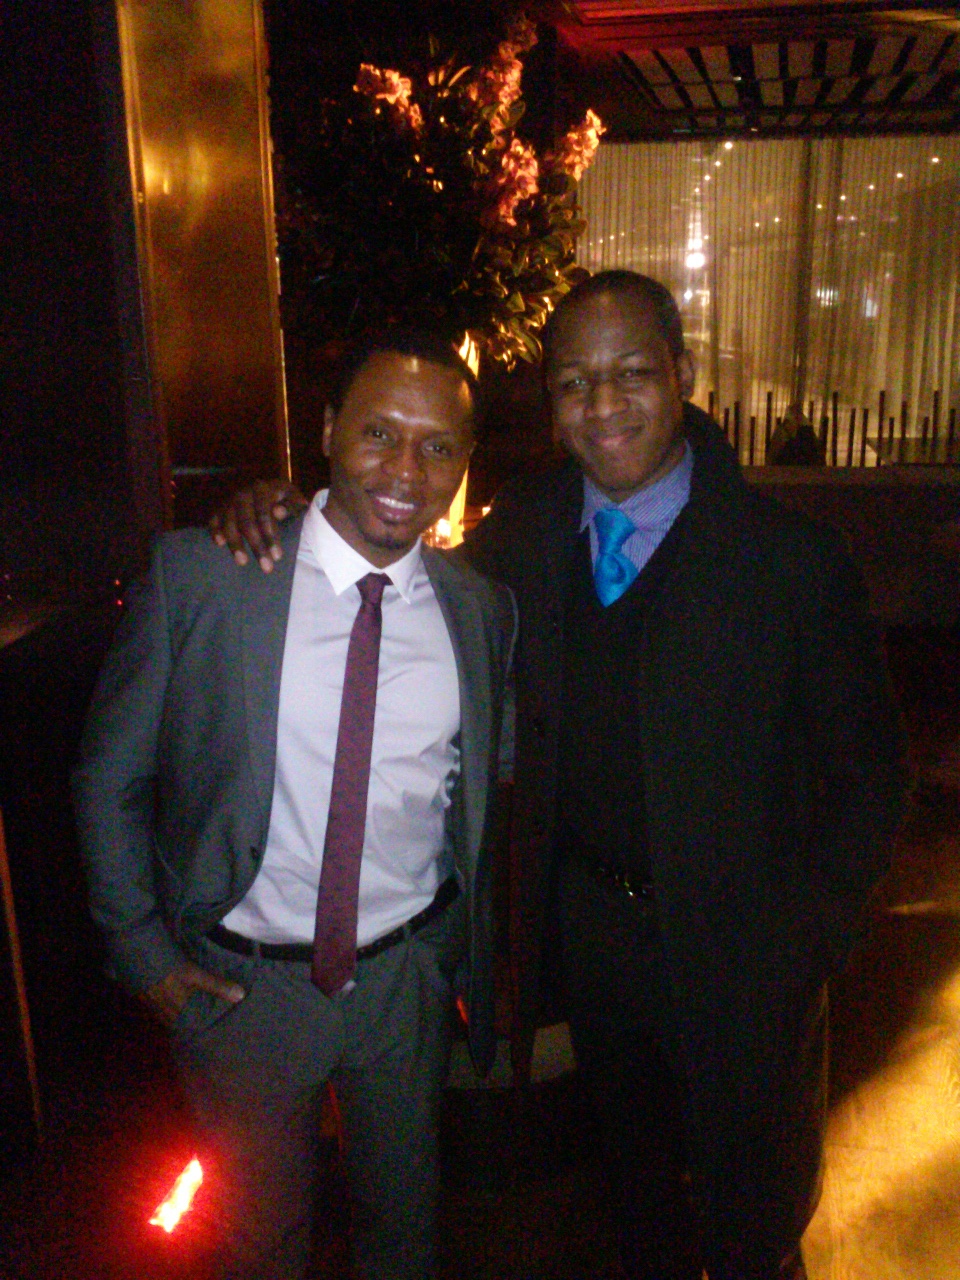 Bruce Wabbit and Malcolm Goodwin at Run All Night premiere.